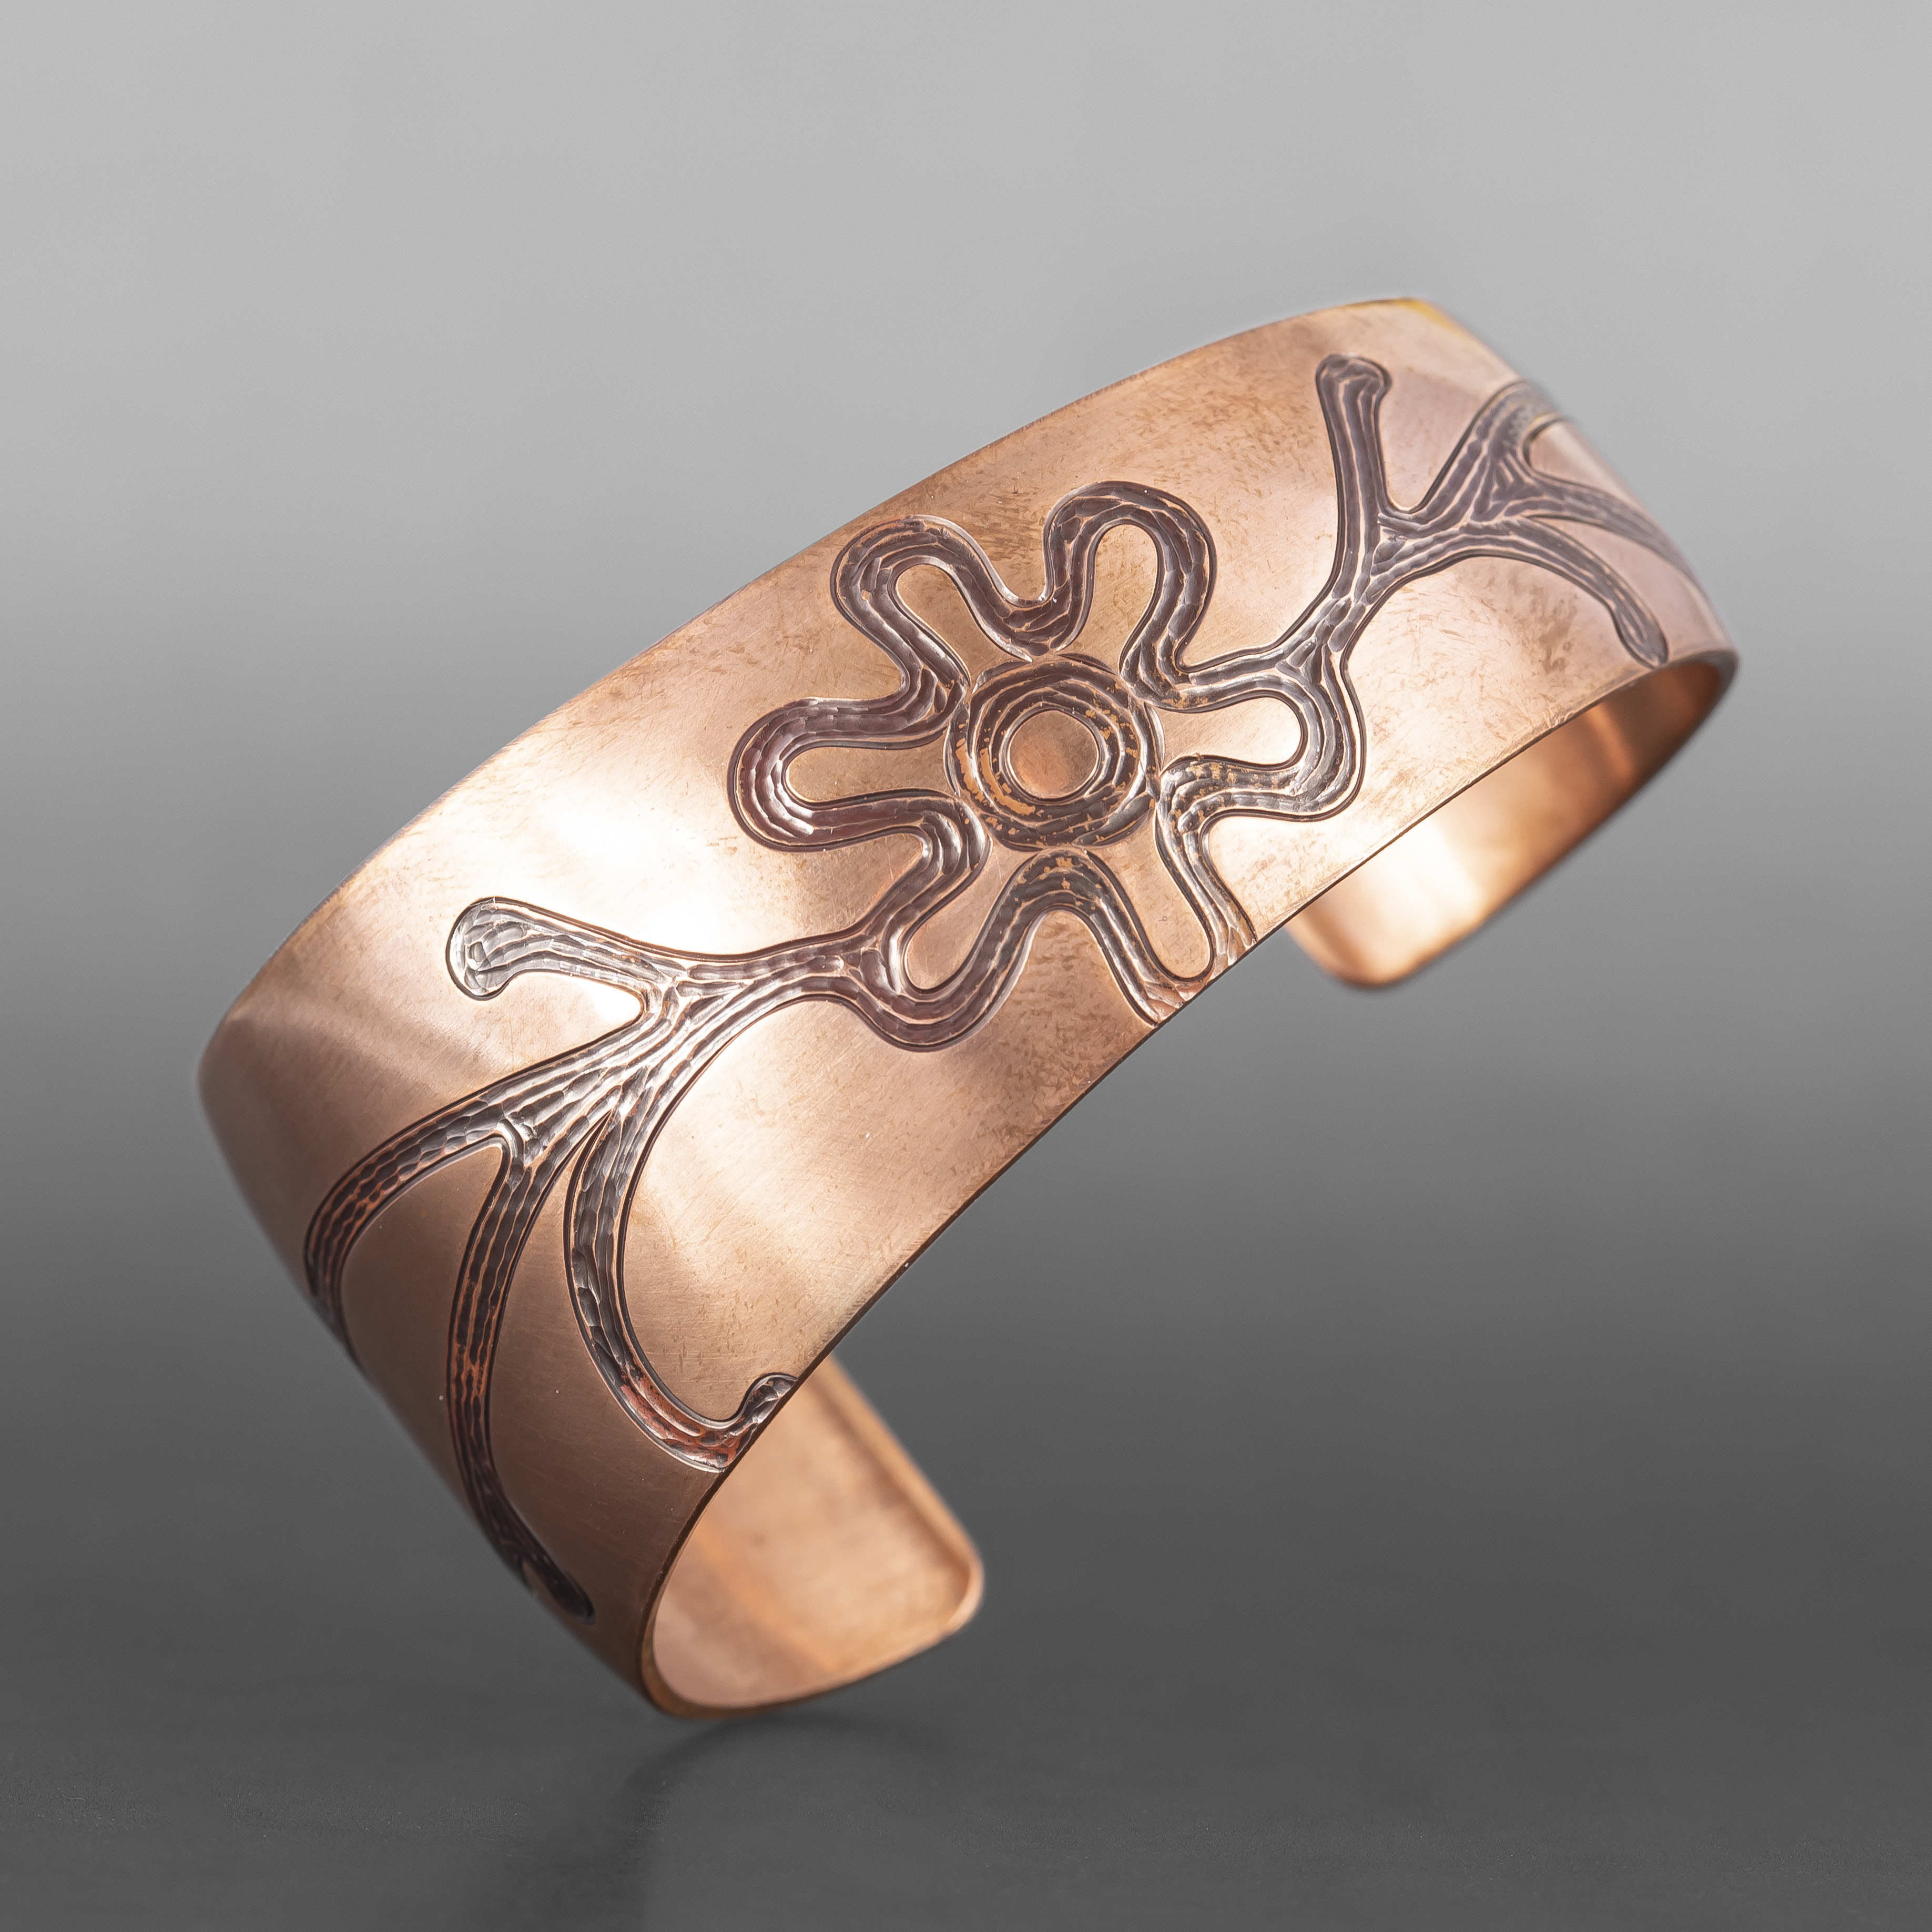 Water is Life Bracelet
Jennifer Younger
Tlingit
Tapered copper
6" x 1½” to ½”
$400